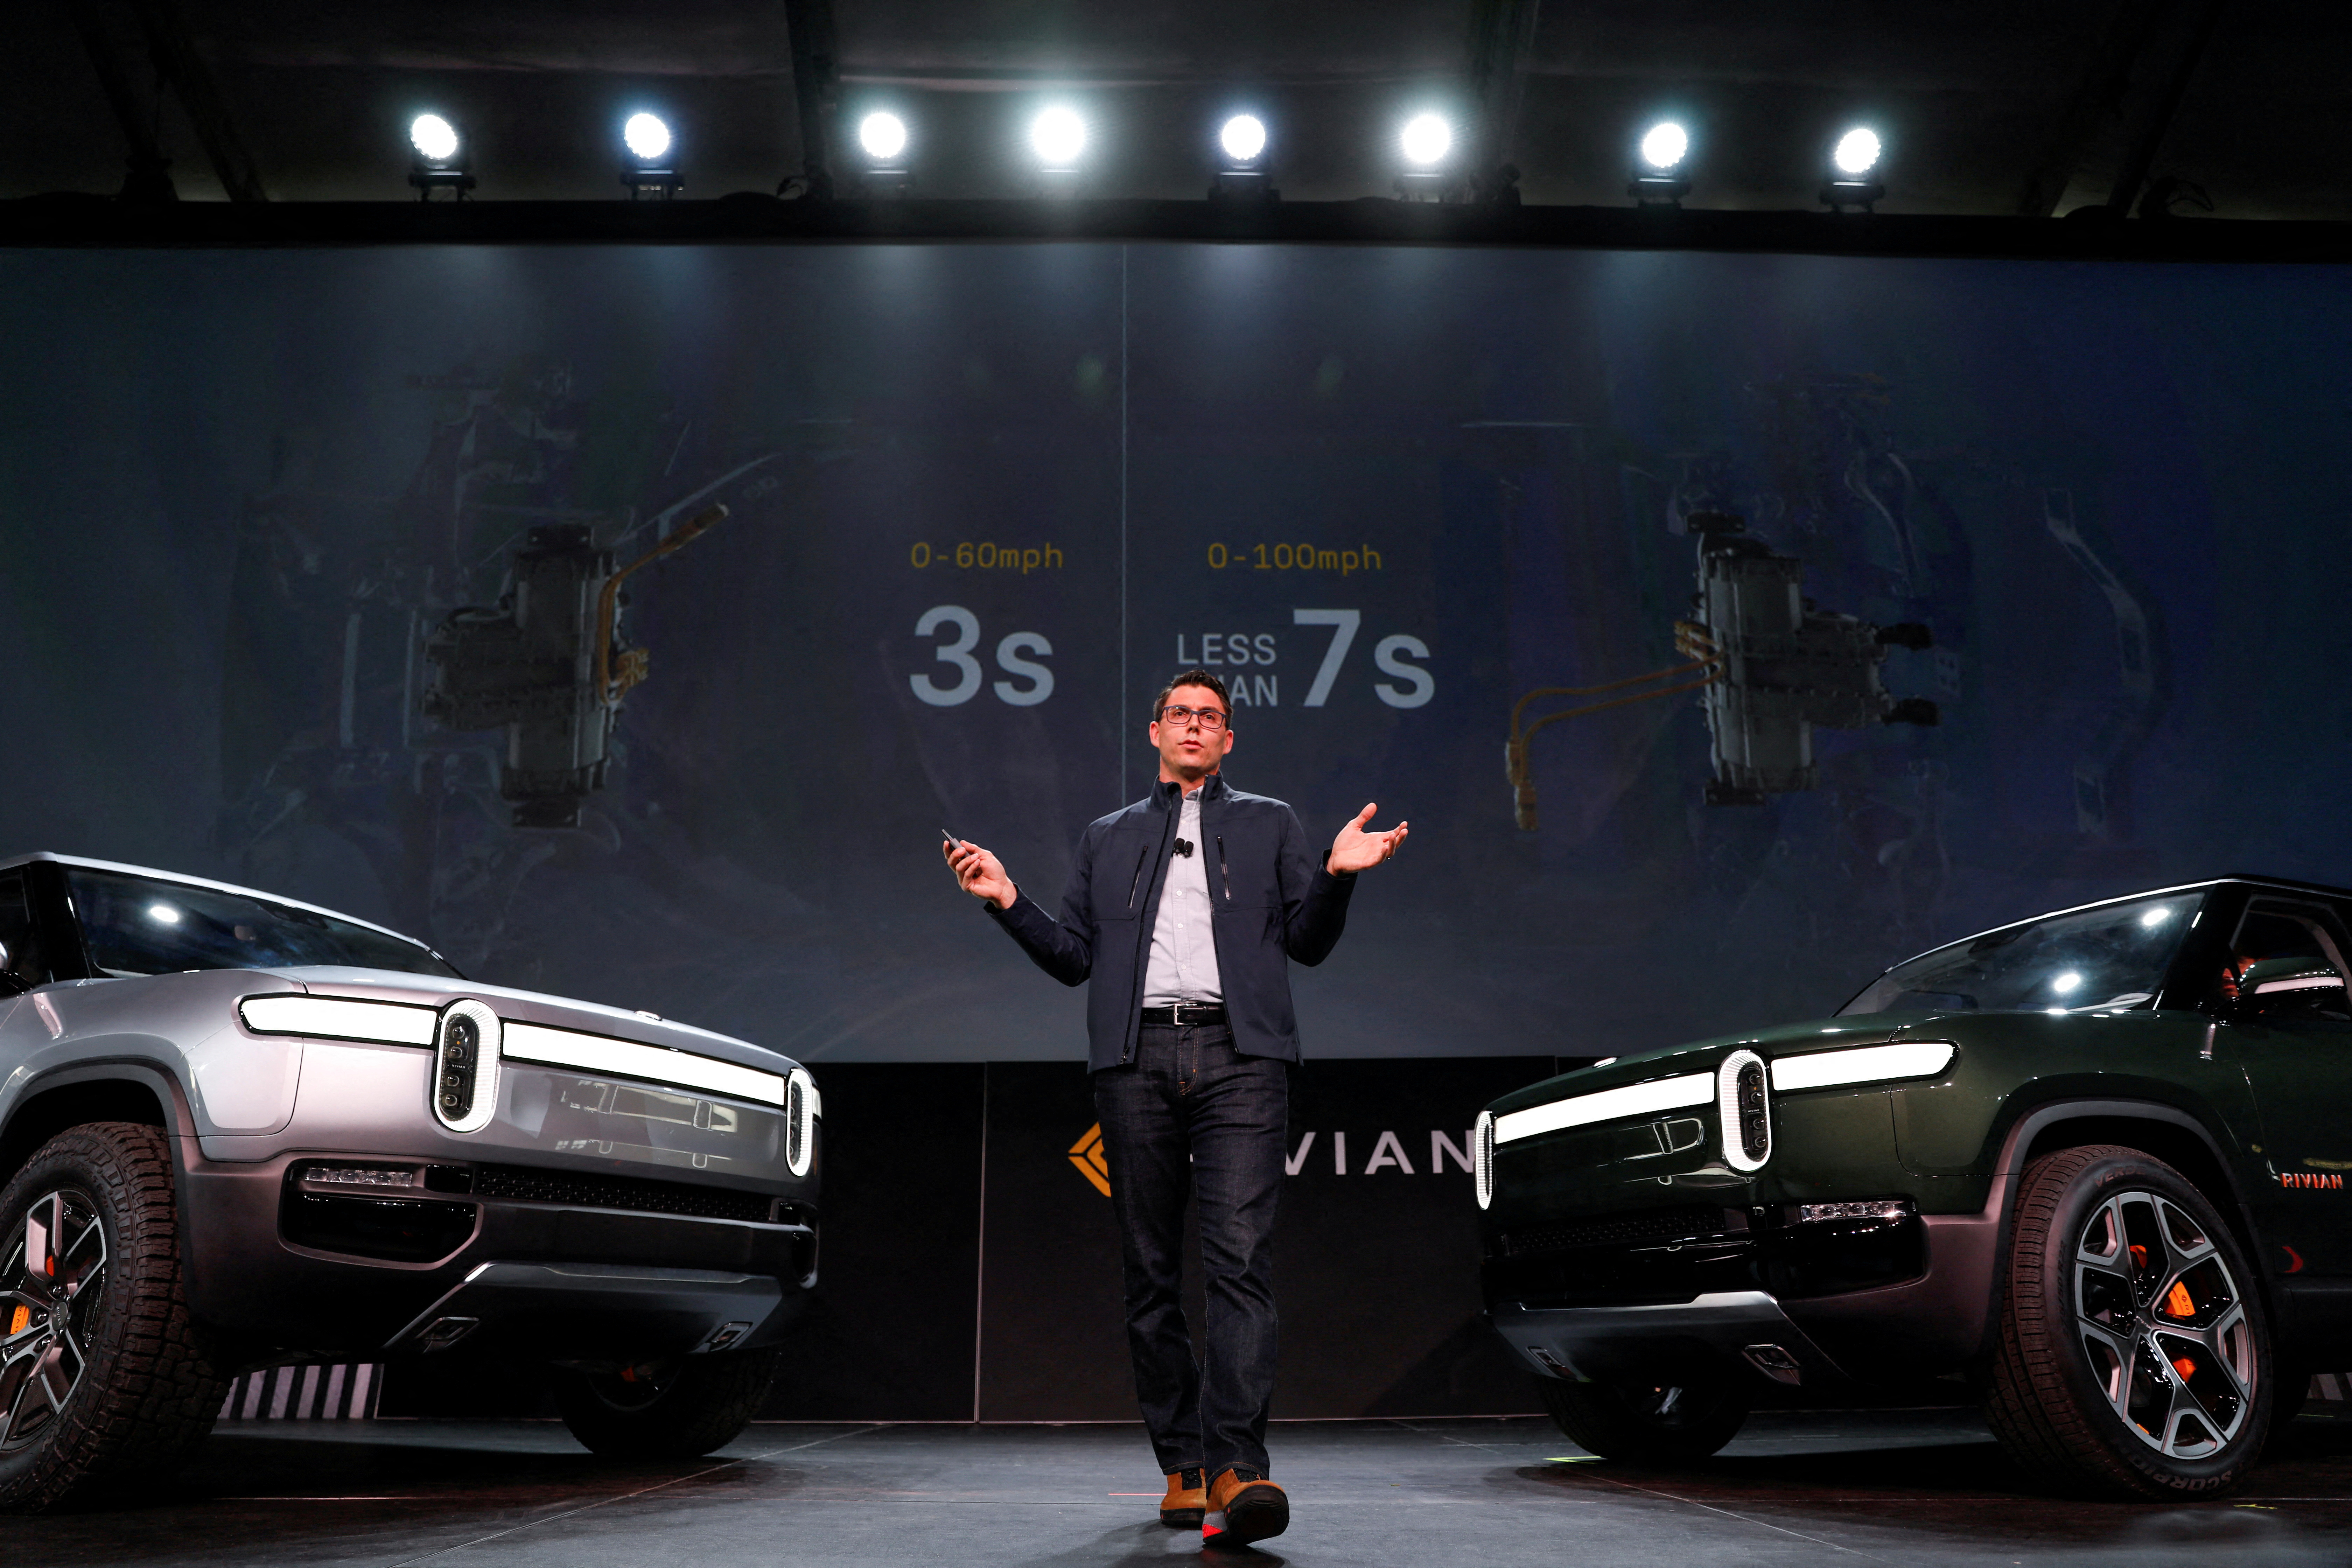 Rivian introduces all-electric pickup truck and SUV at LA Auto Show in Los Angeles